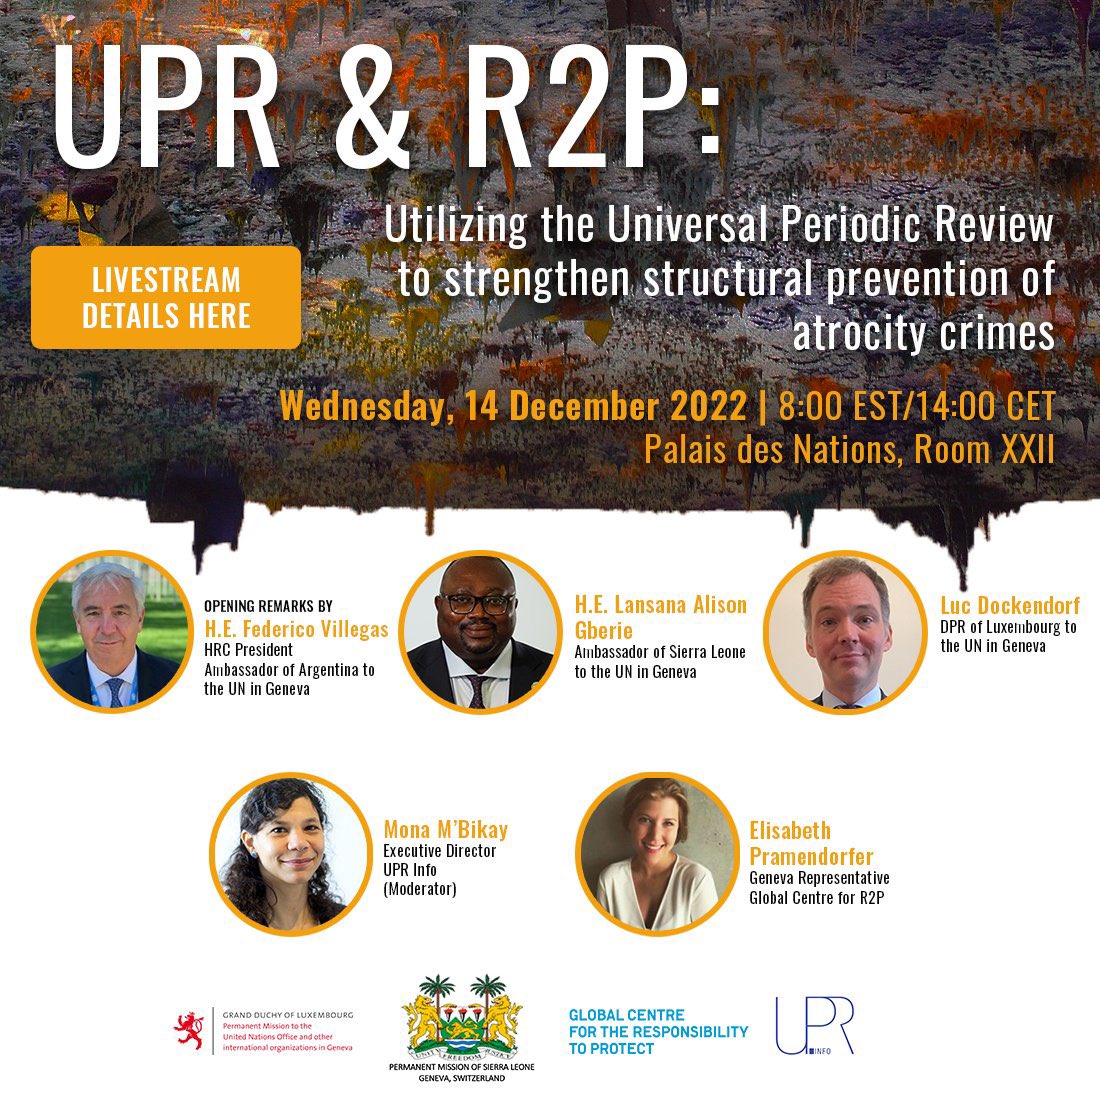 Looking forward to the session  “Utilising the UPR to strengthen structural prevention of #atrocitycrimes” with @LUinGeneva, @SLMissionGeneva & @UPRinfo @UN_HRC Pres. @FVillegasARG, @lagberie, @LucDockendorf, @UNHumanRights, @MonaMBikay and @ElisabethGCR2P! @GCR2P @IBVprev